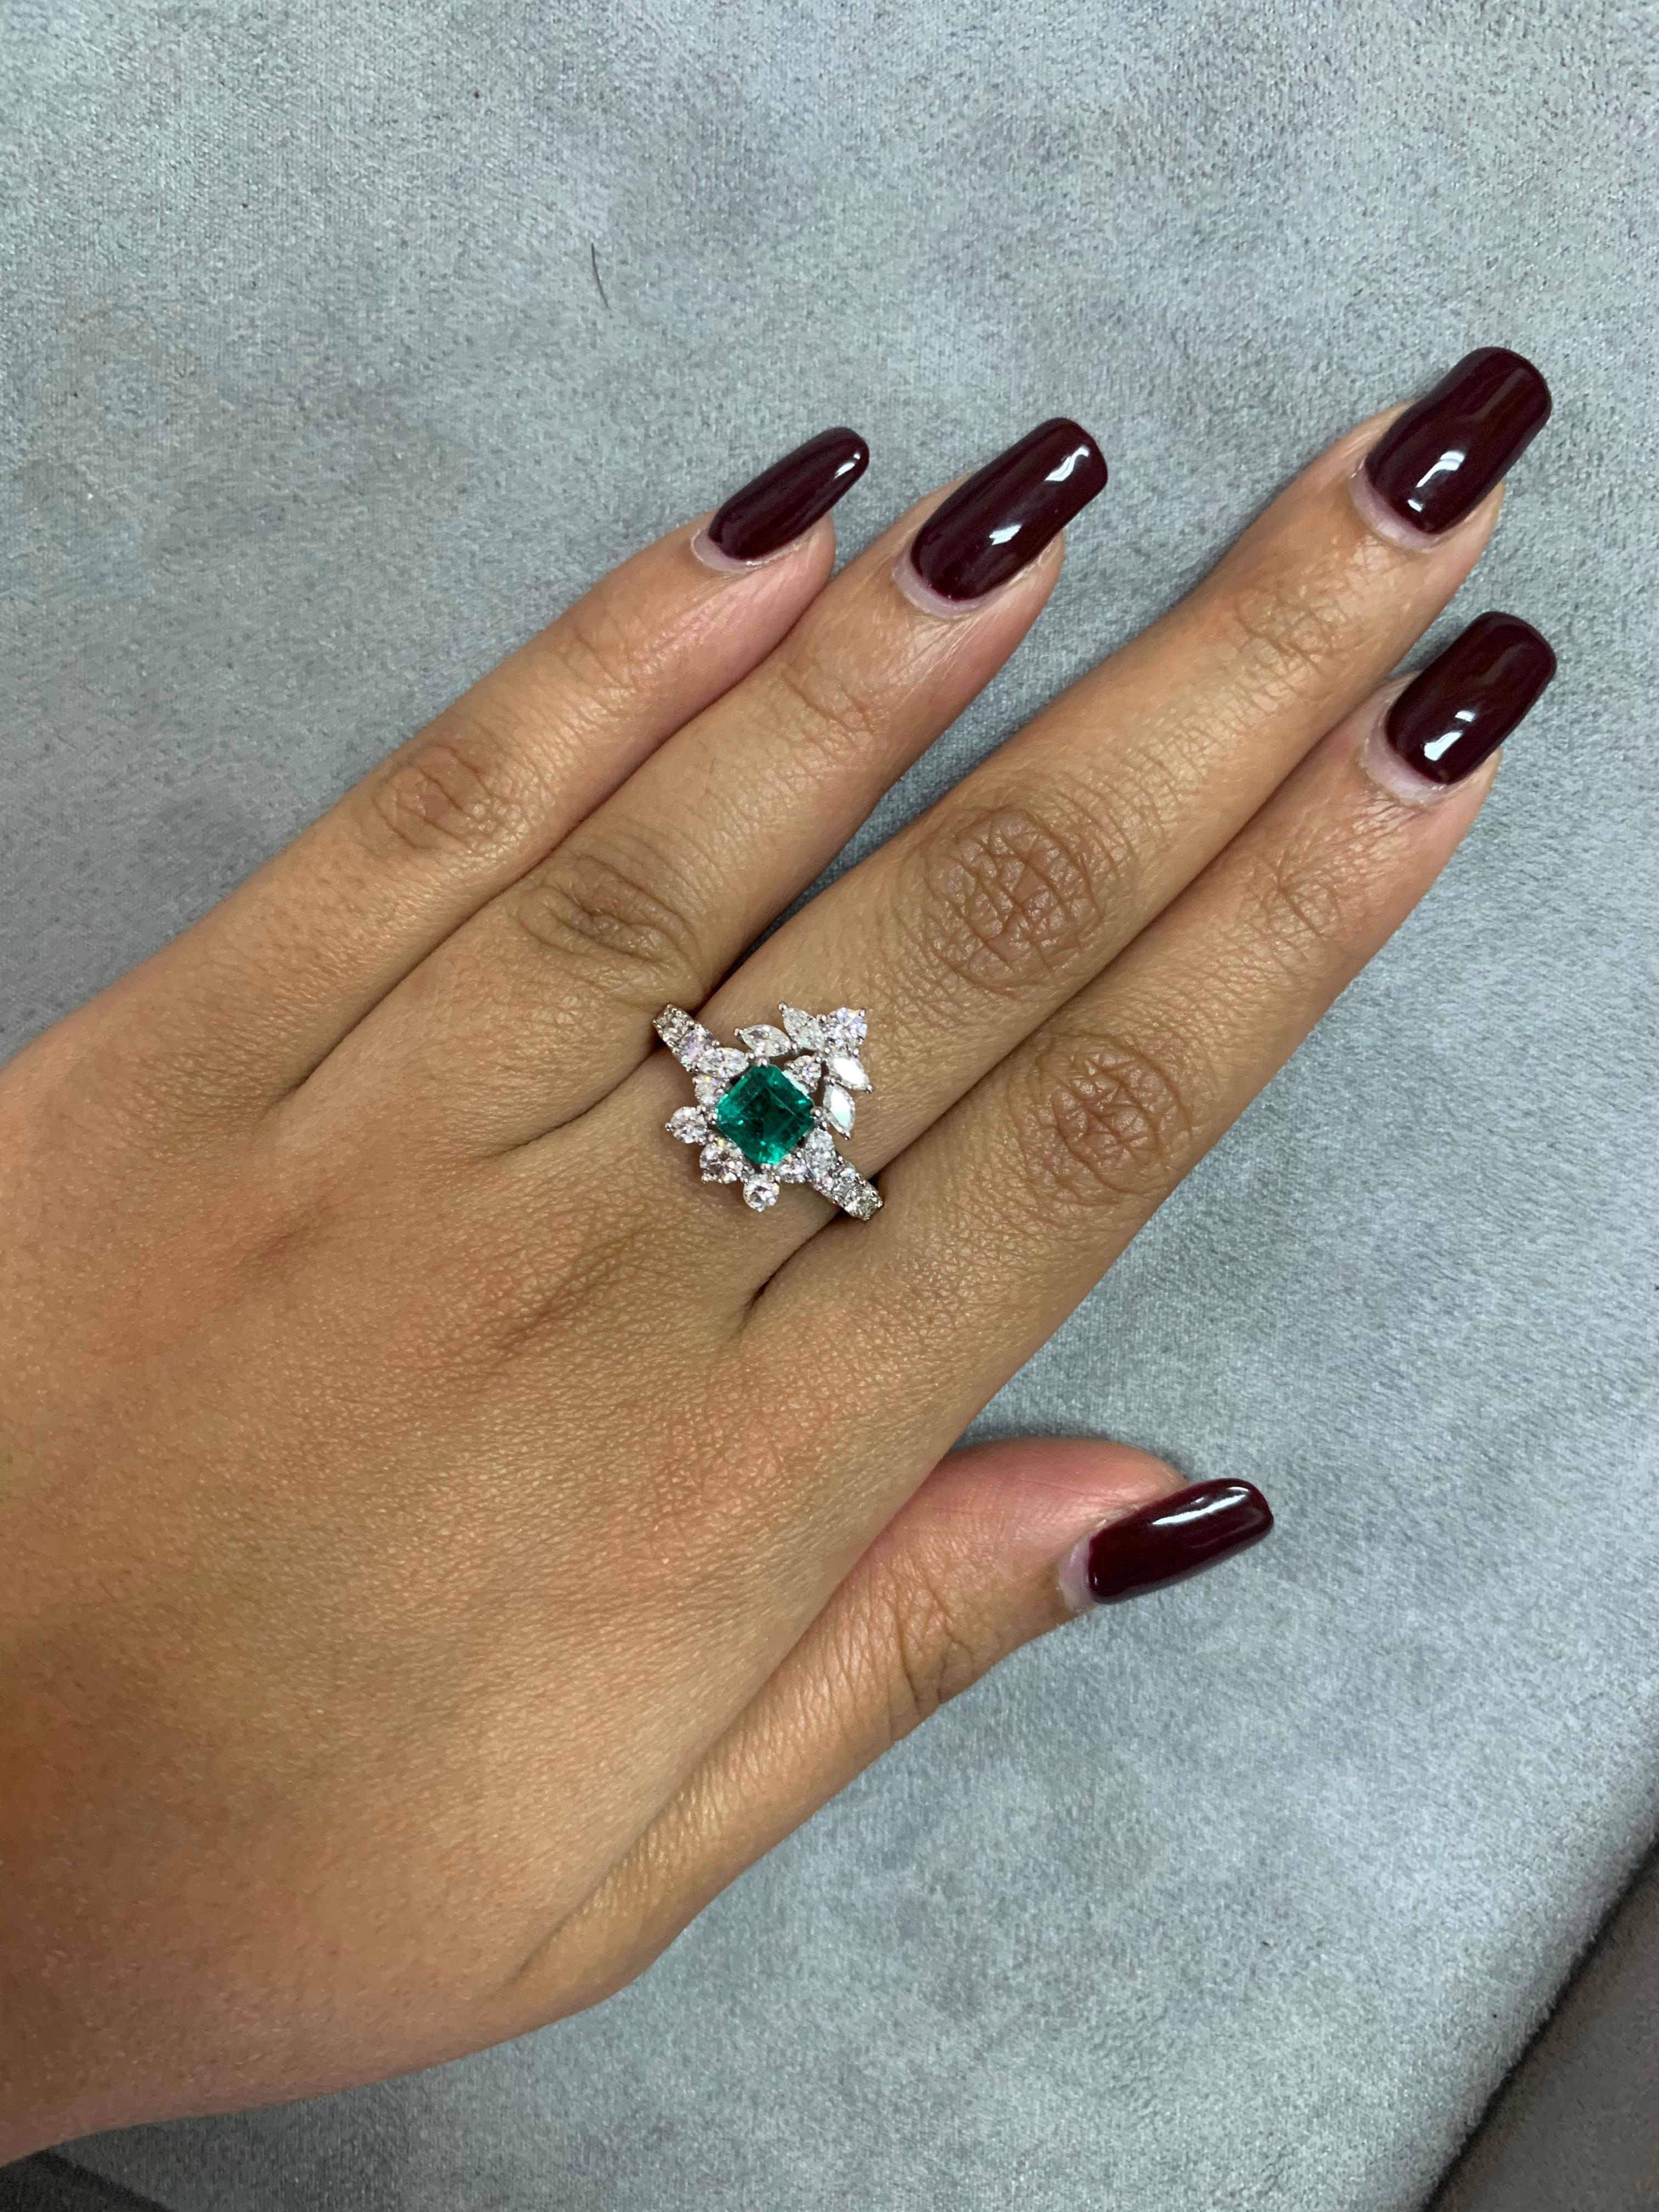 Classic rings with precious gemstones. We present a collection of everyday jewelry with emeralds that are accented with diamonds. These are gorgeous bridal and engagement rings to give to your loved one. 

Designer Zambian emerald ring in 18K white